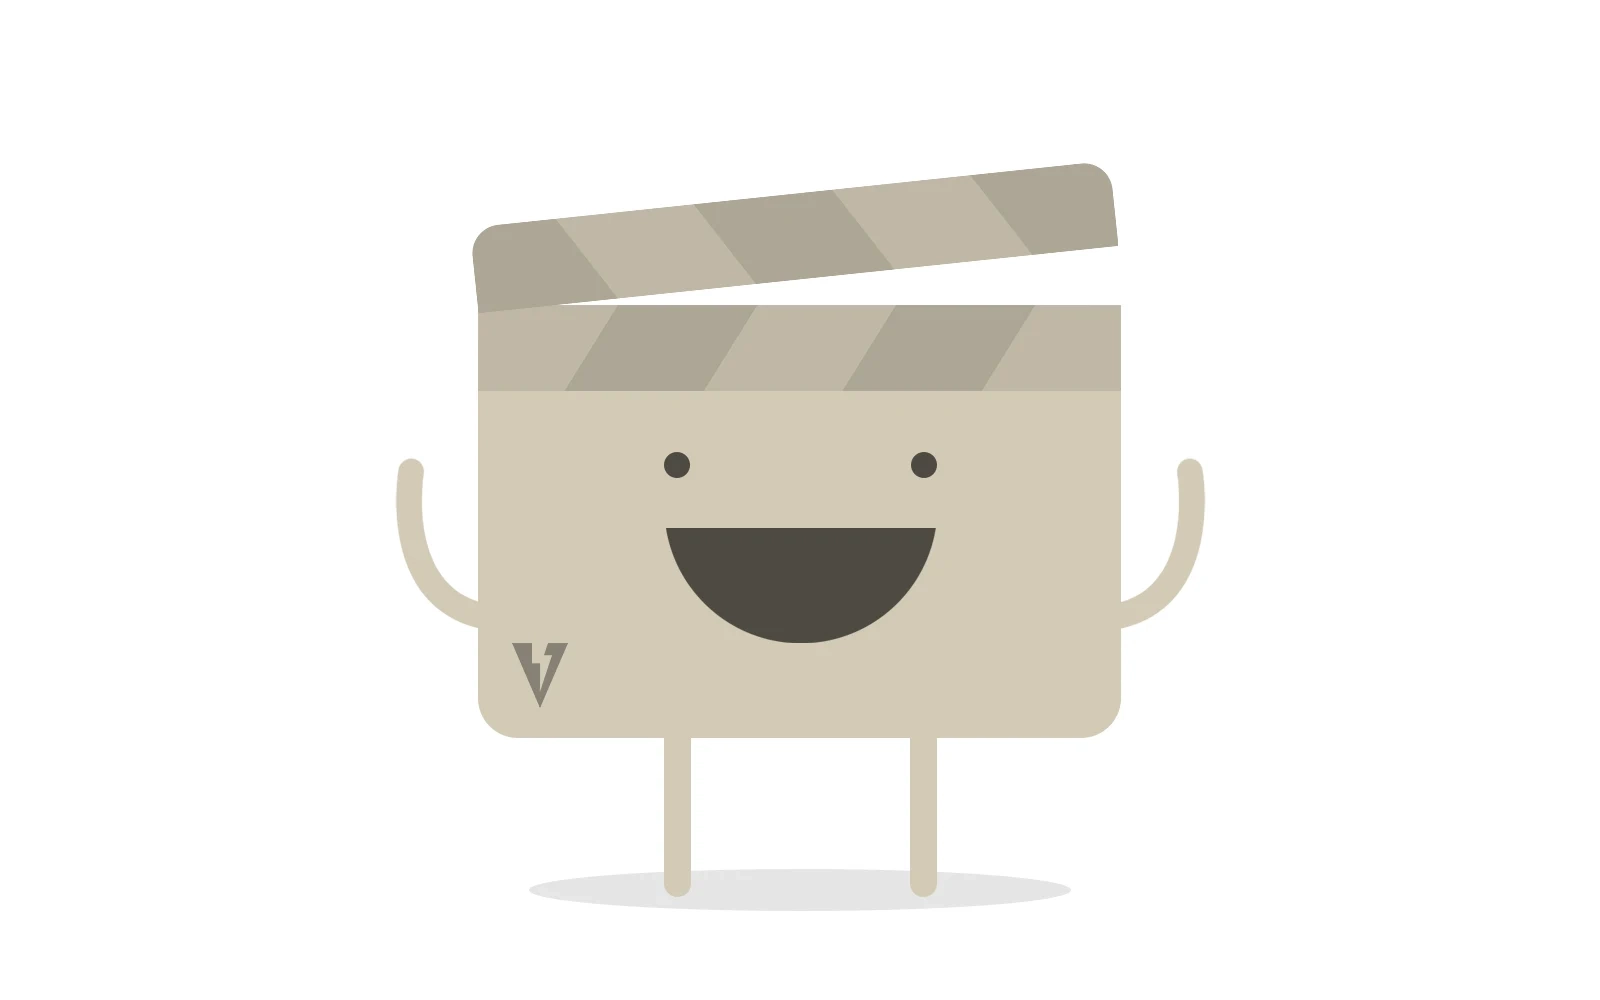 The Visual Storm mascot is a modern, quirky and fun cartoon clapperboard shown front on and smiling